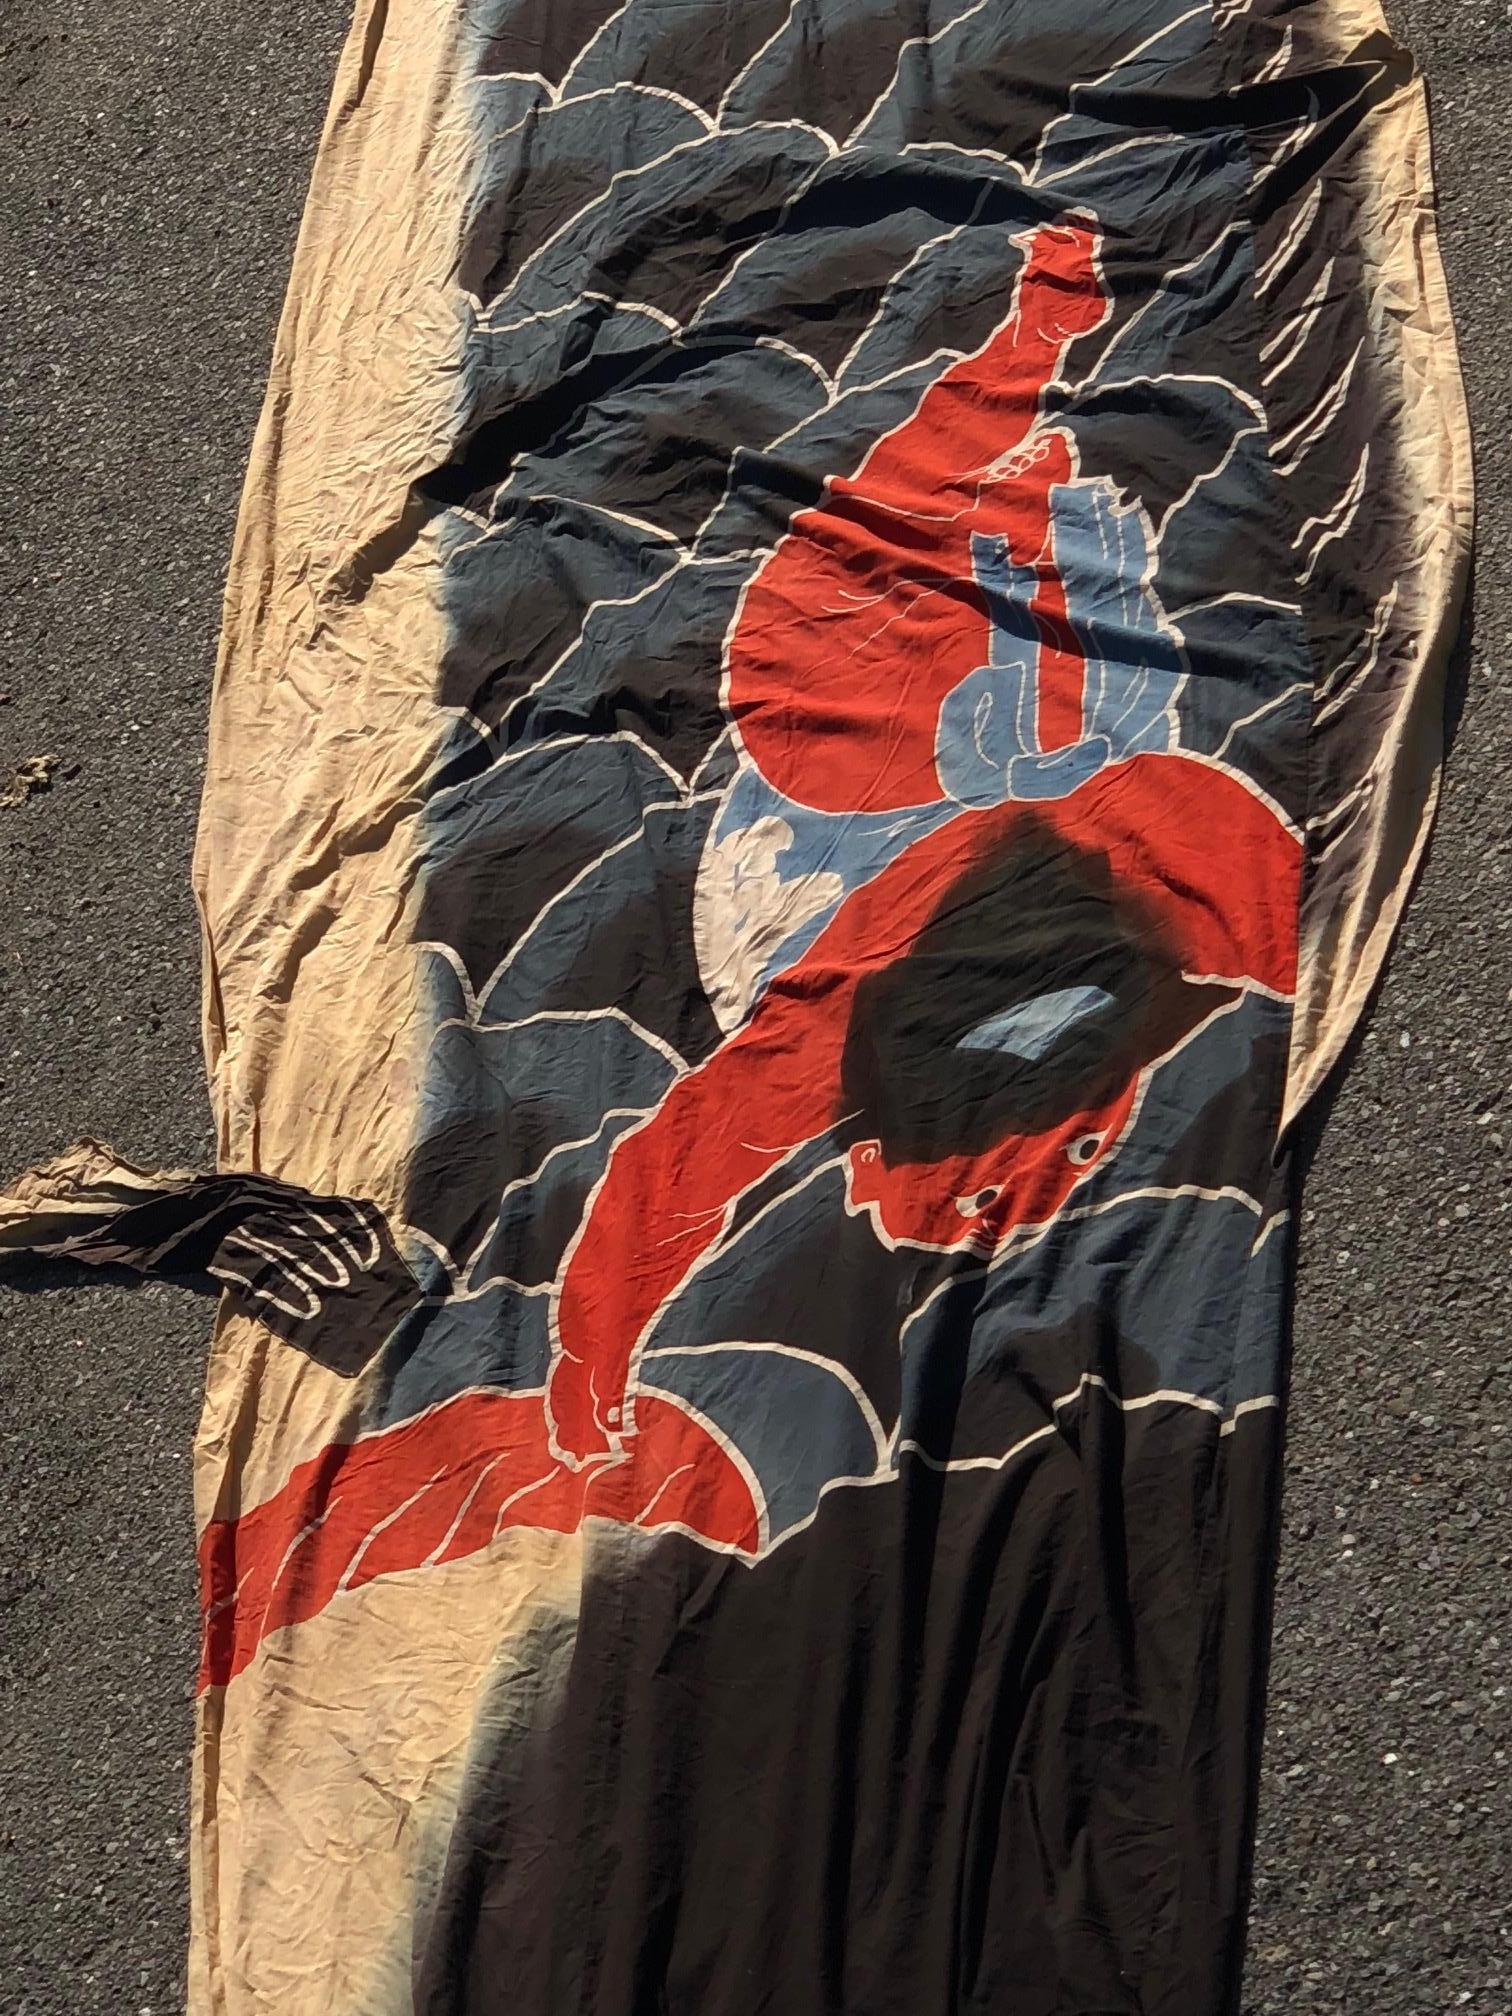 From our recent Japanese Travels

Japanese an unusually long, gigantic Old Children's Day Koi Flag, -Koinobori-,  measuring a whopping 320